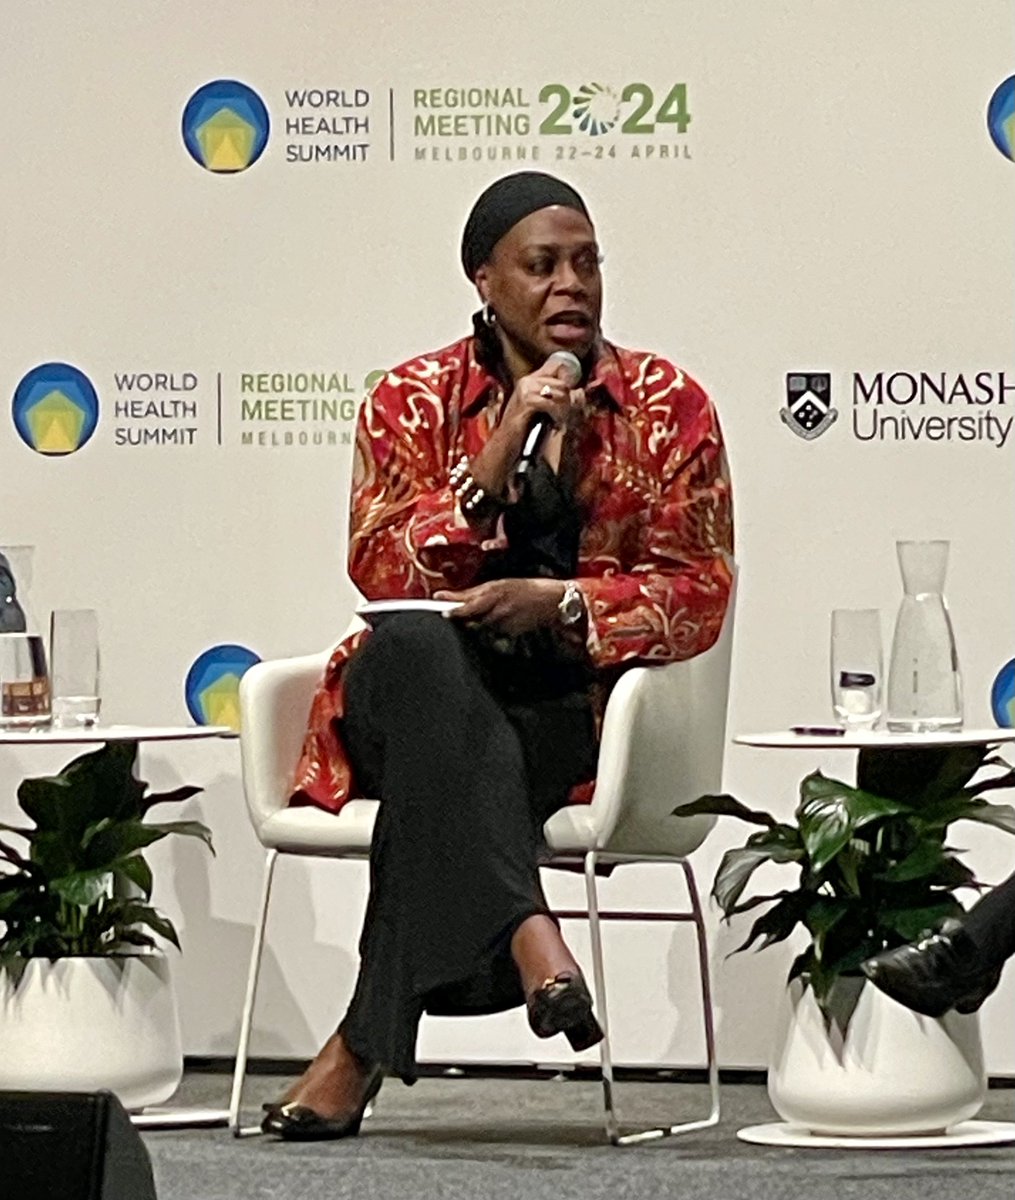 The #SDGs are failing the global south, we can’t just look to New York and Geneva for solutions, we need to look to communities to identify solutions that will work @yodifiji. #WHSMelbourne2024